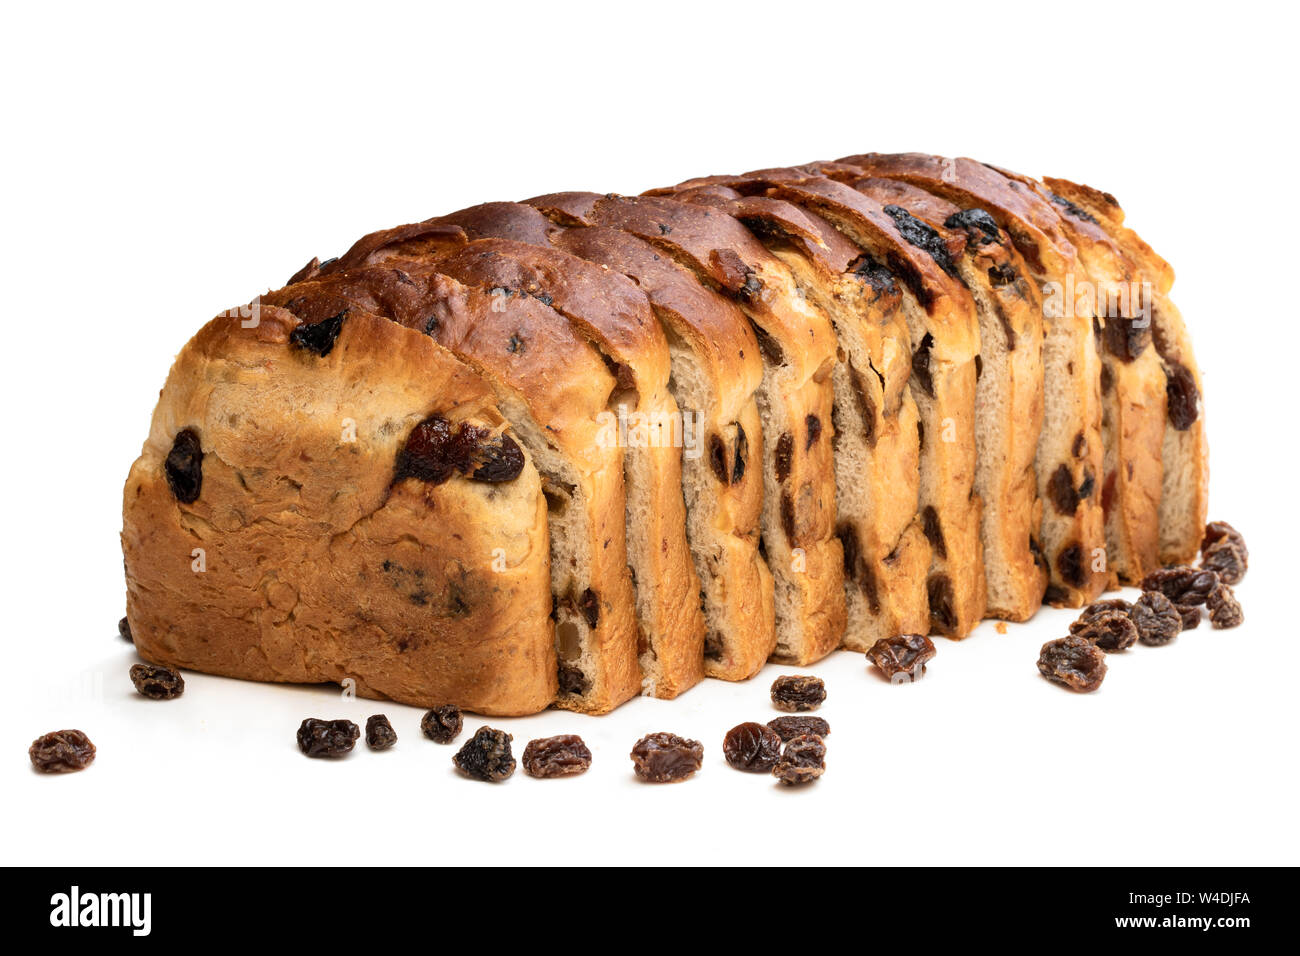 Sliced  Irish fruit loaf with sultanas and cherries isolated on white Stock Photo